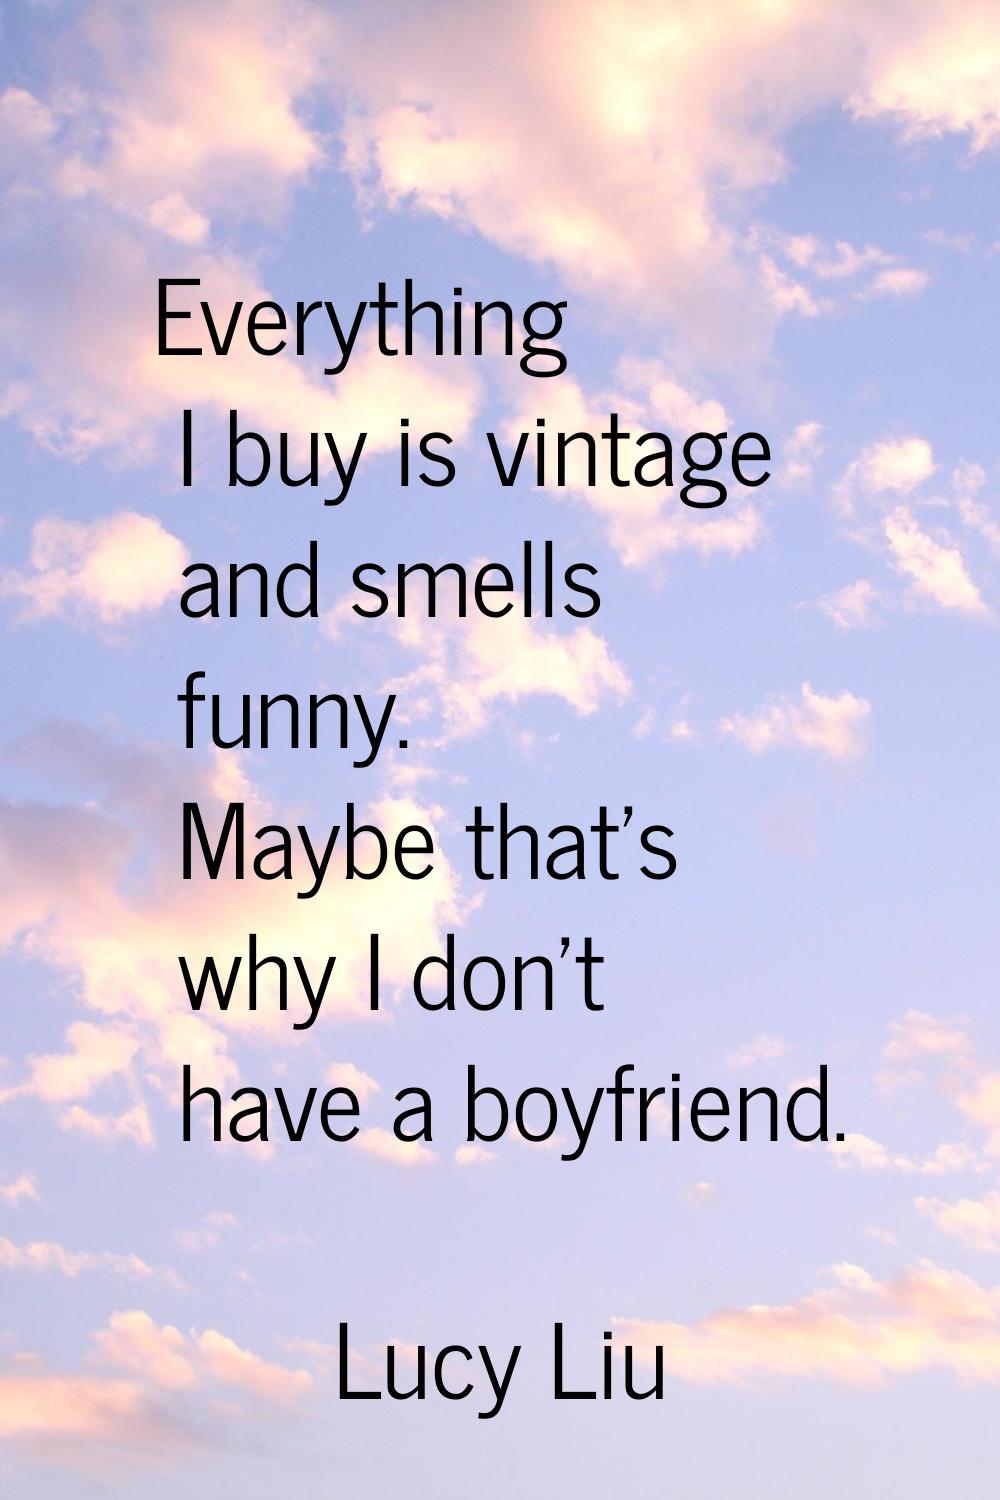 Everything I buy is vintage and smells funny. Maybe that's why I don't have a boyfriend.